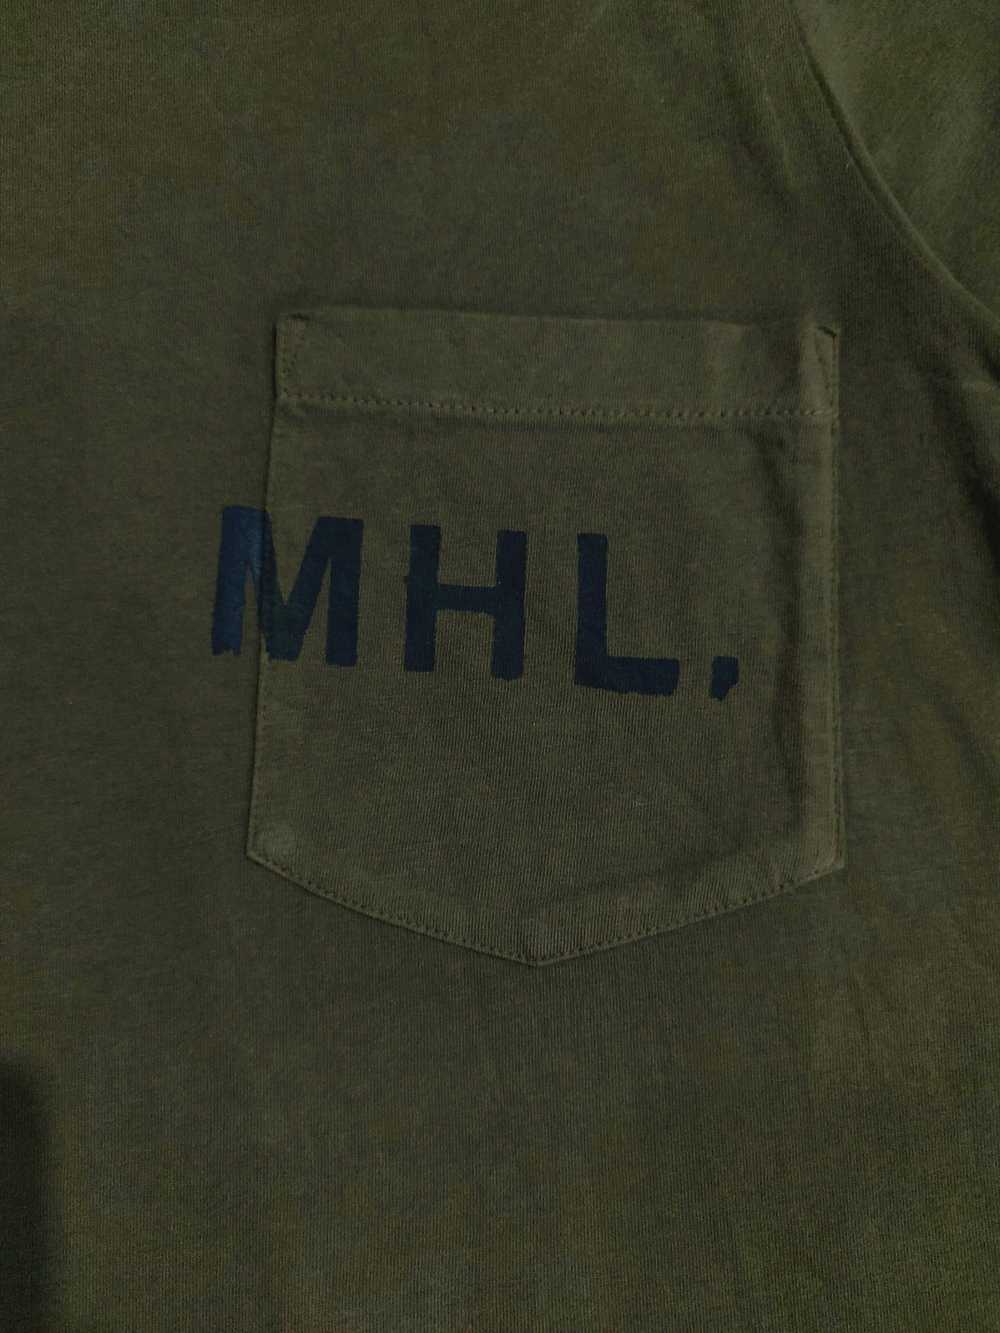 RARE! MARGARET HOWELL "MHL." SPELL OUT POCKET TEE - image 4